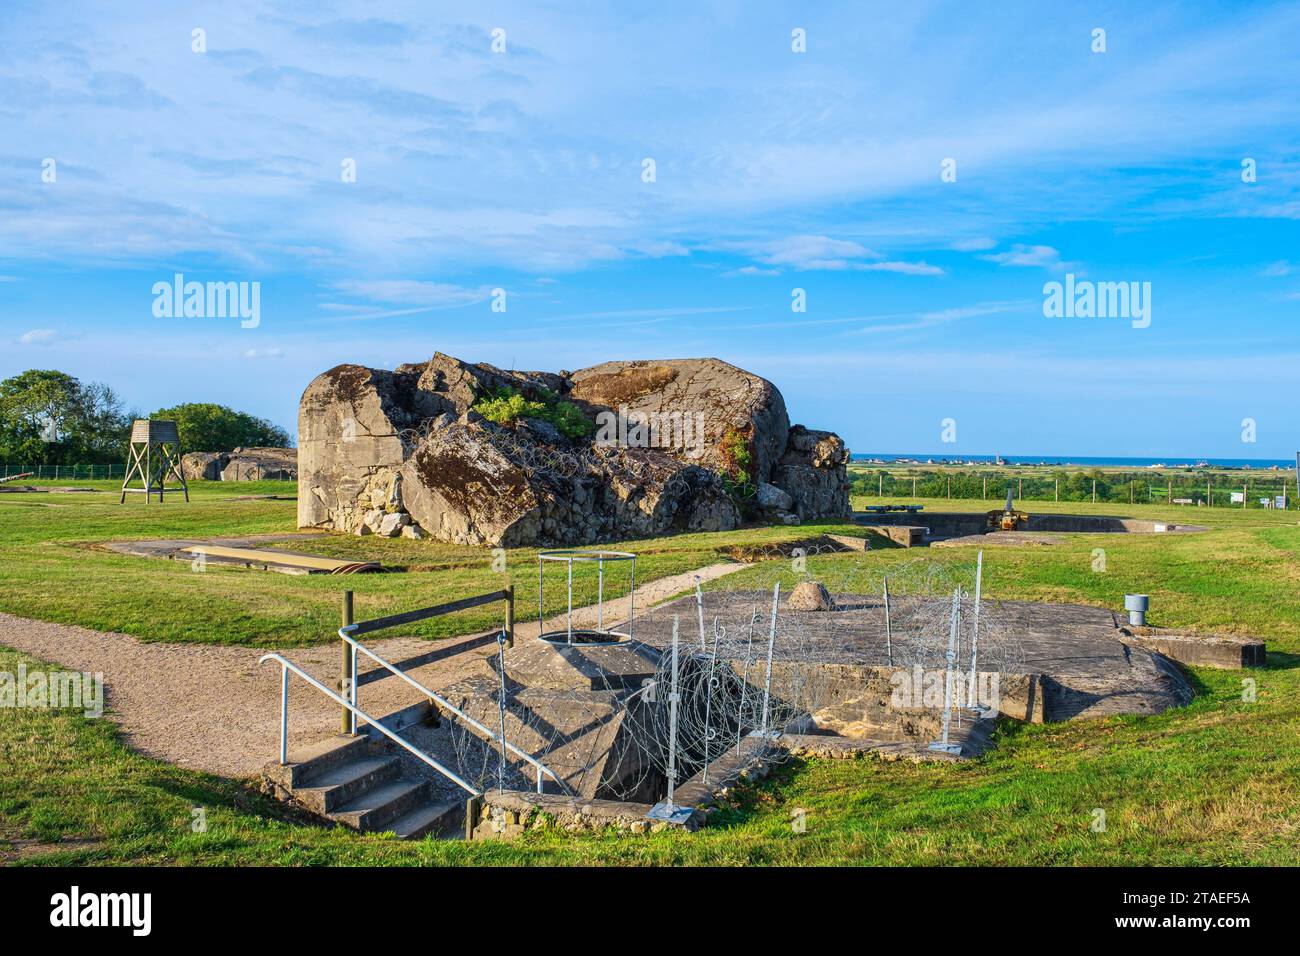 France, Manche, Cotentin, Saint Marcouf, Crisbecq battery, German coastal battery of the Atlantic Wall which was active during the Normandy landings in June 1944 Stock Photo